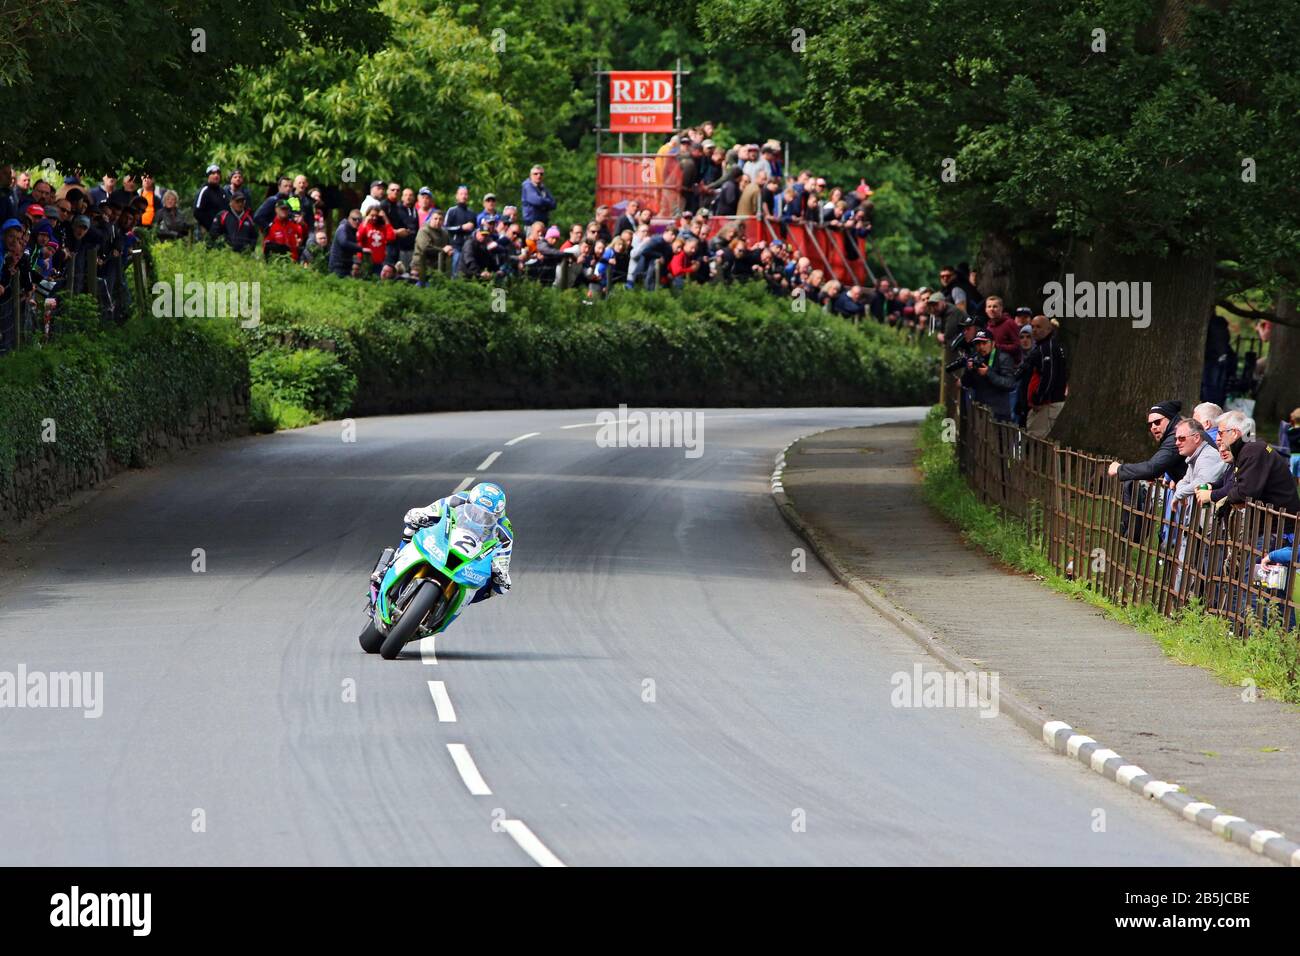 Dean Harrison power sliding away from the K Tree during the 2019 Senior TT motorcycle race on the Isle of Man on his Silicone Racing Kawasaki Stock Photo